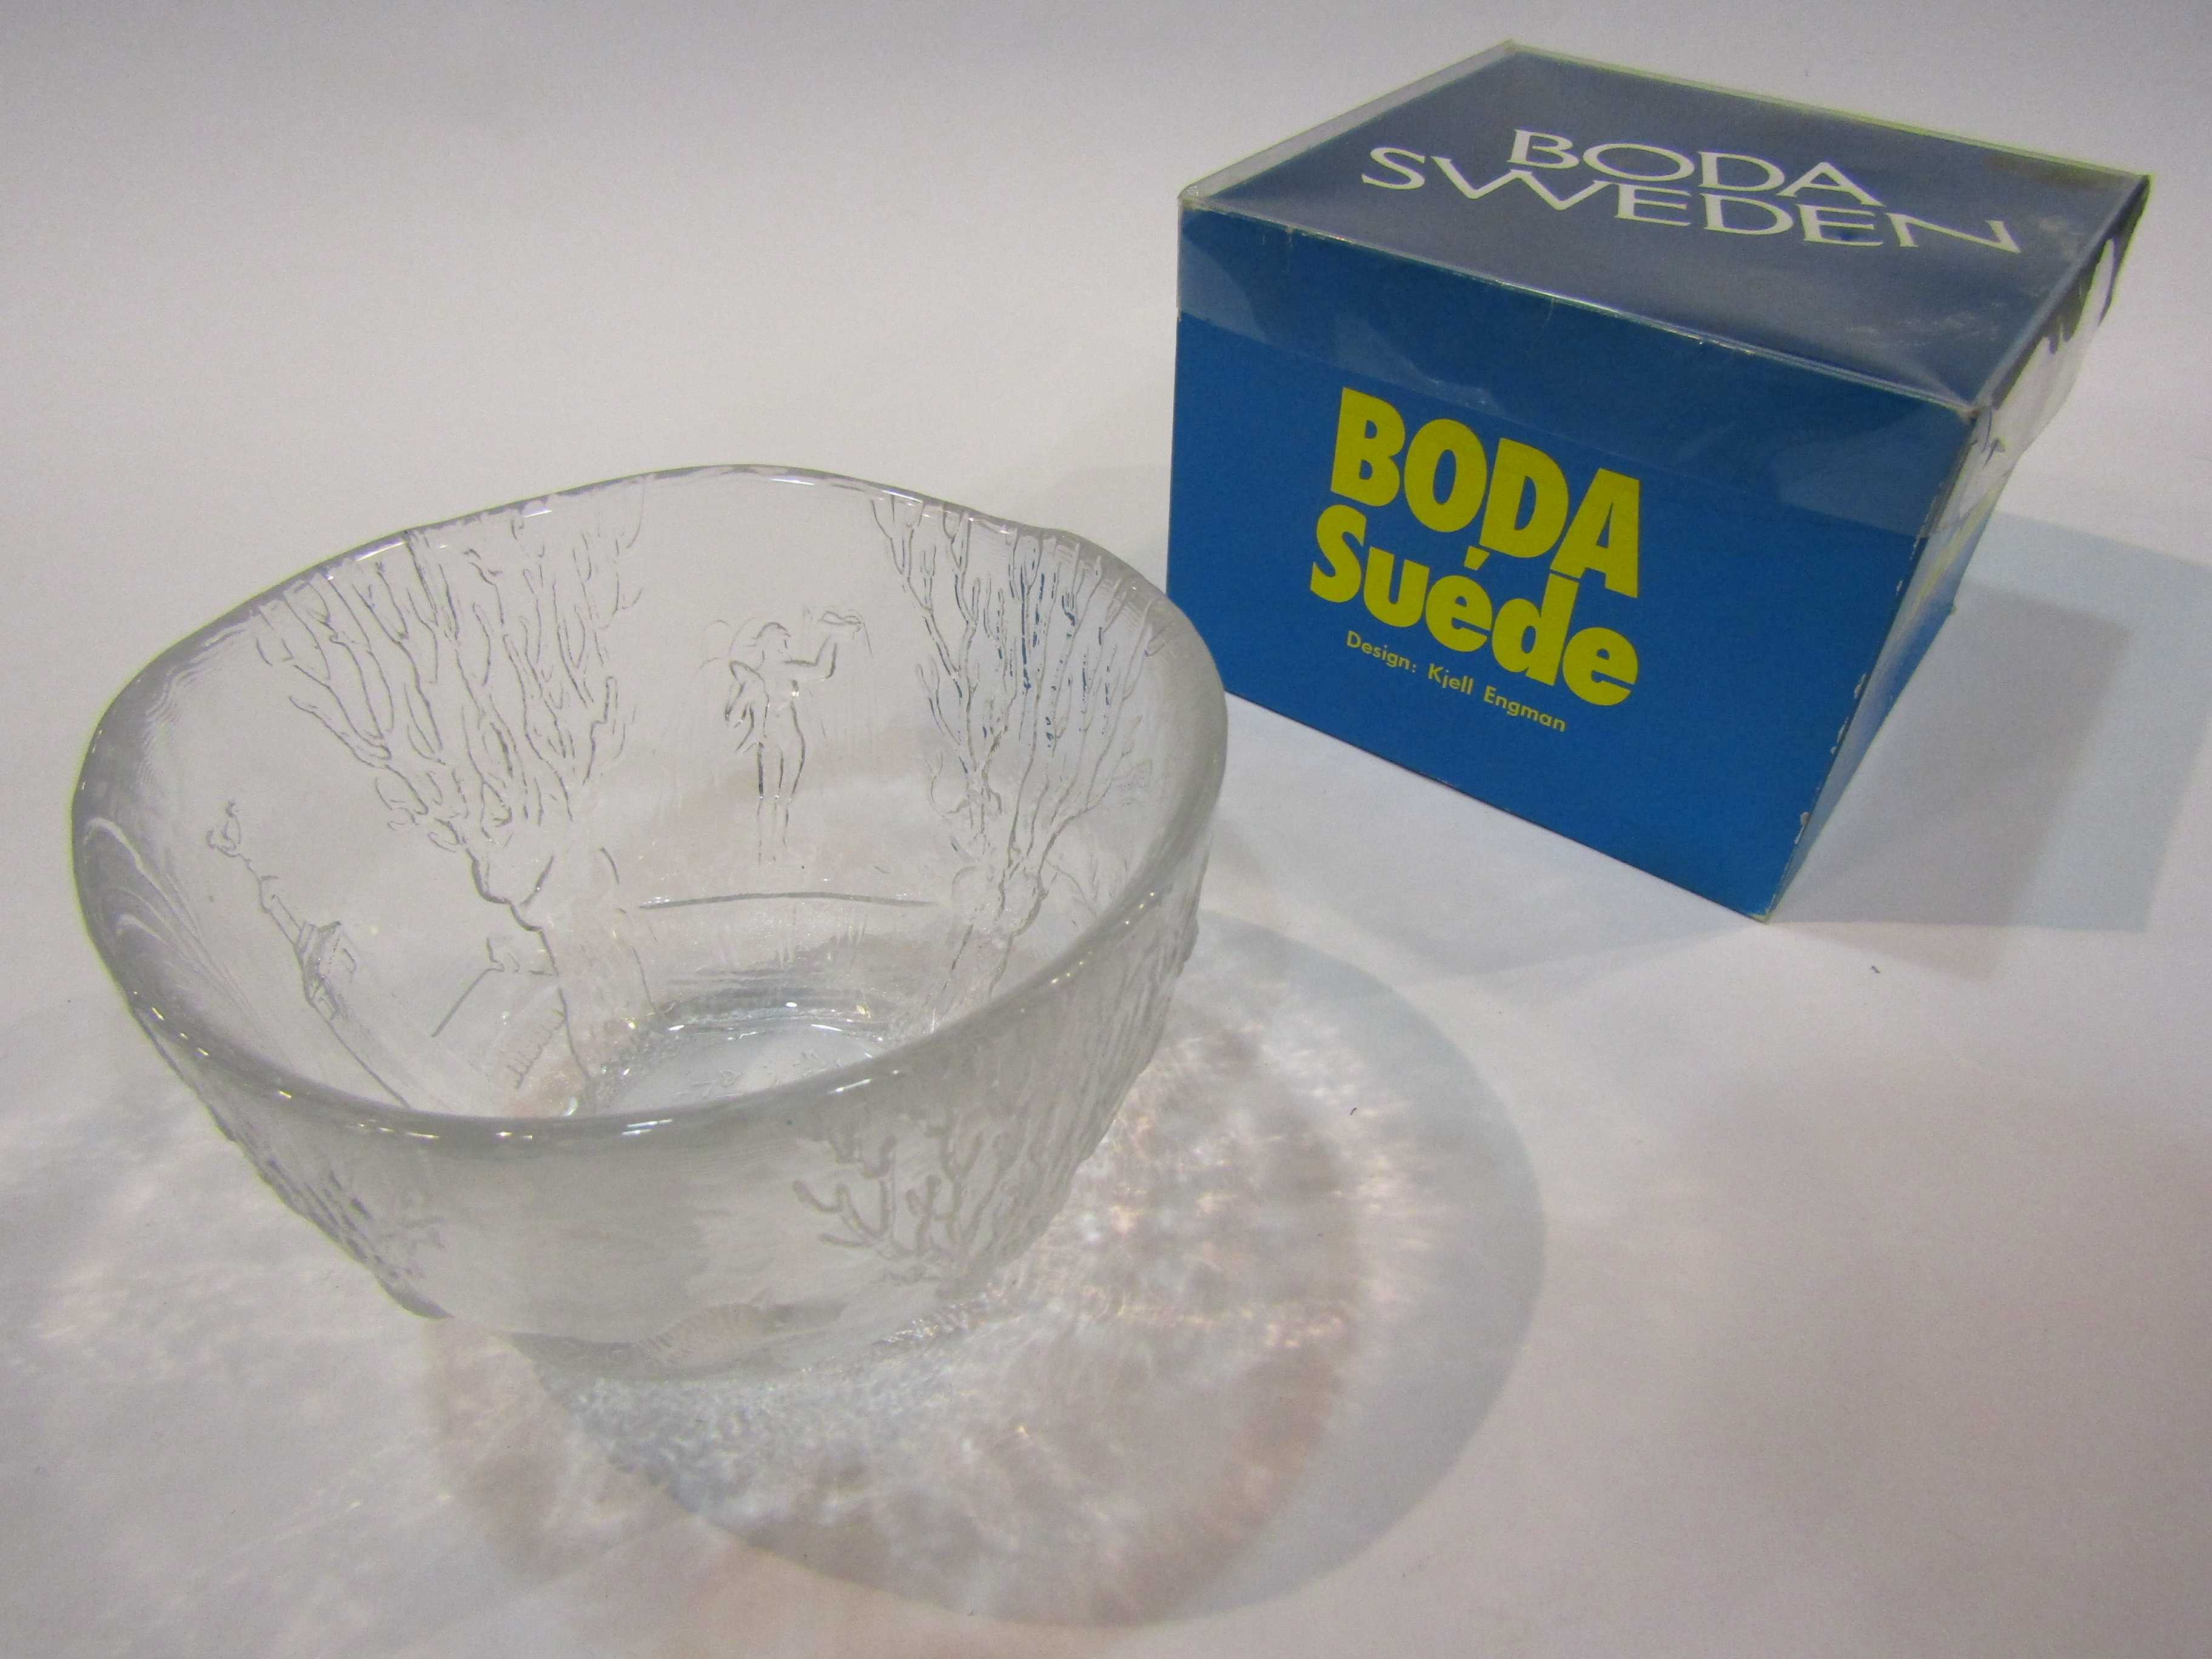 A Boda of Sweden clear glass bowl, - Image 3 of 3